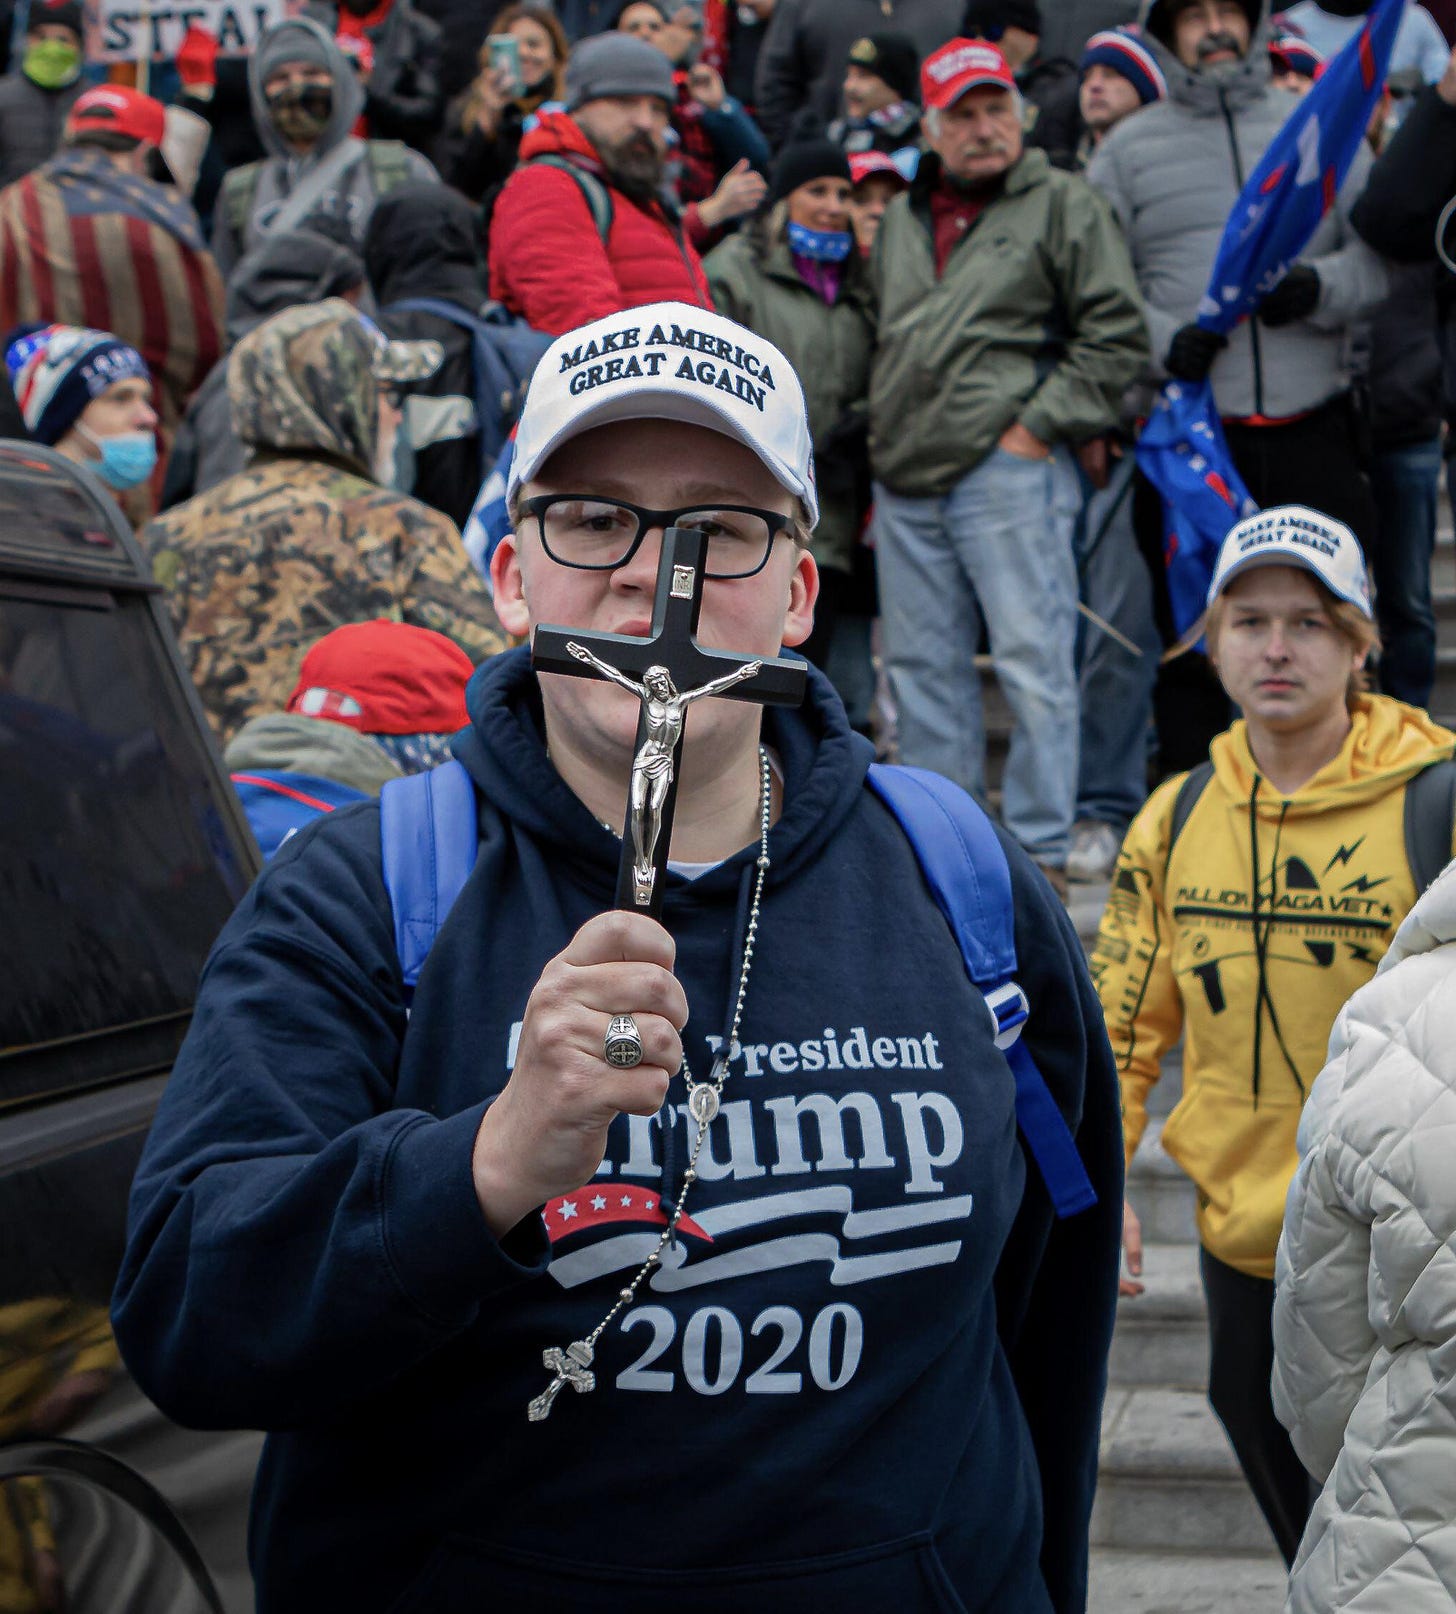 A man wearing a MAGA hat and Trump 2020 sweatshirt is holding up a crucifix